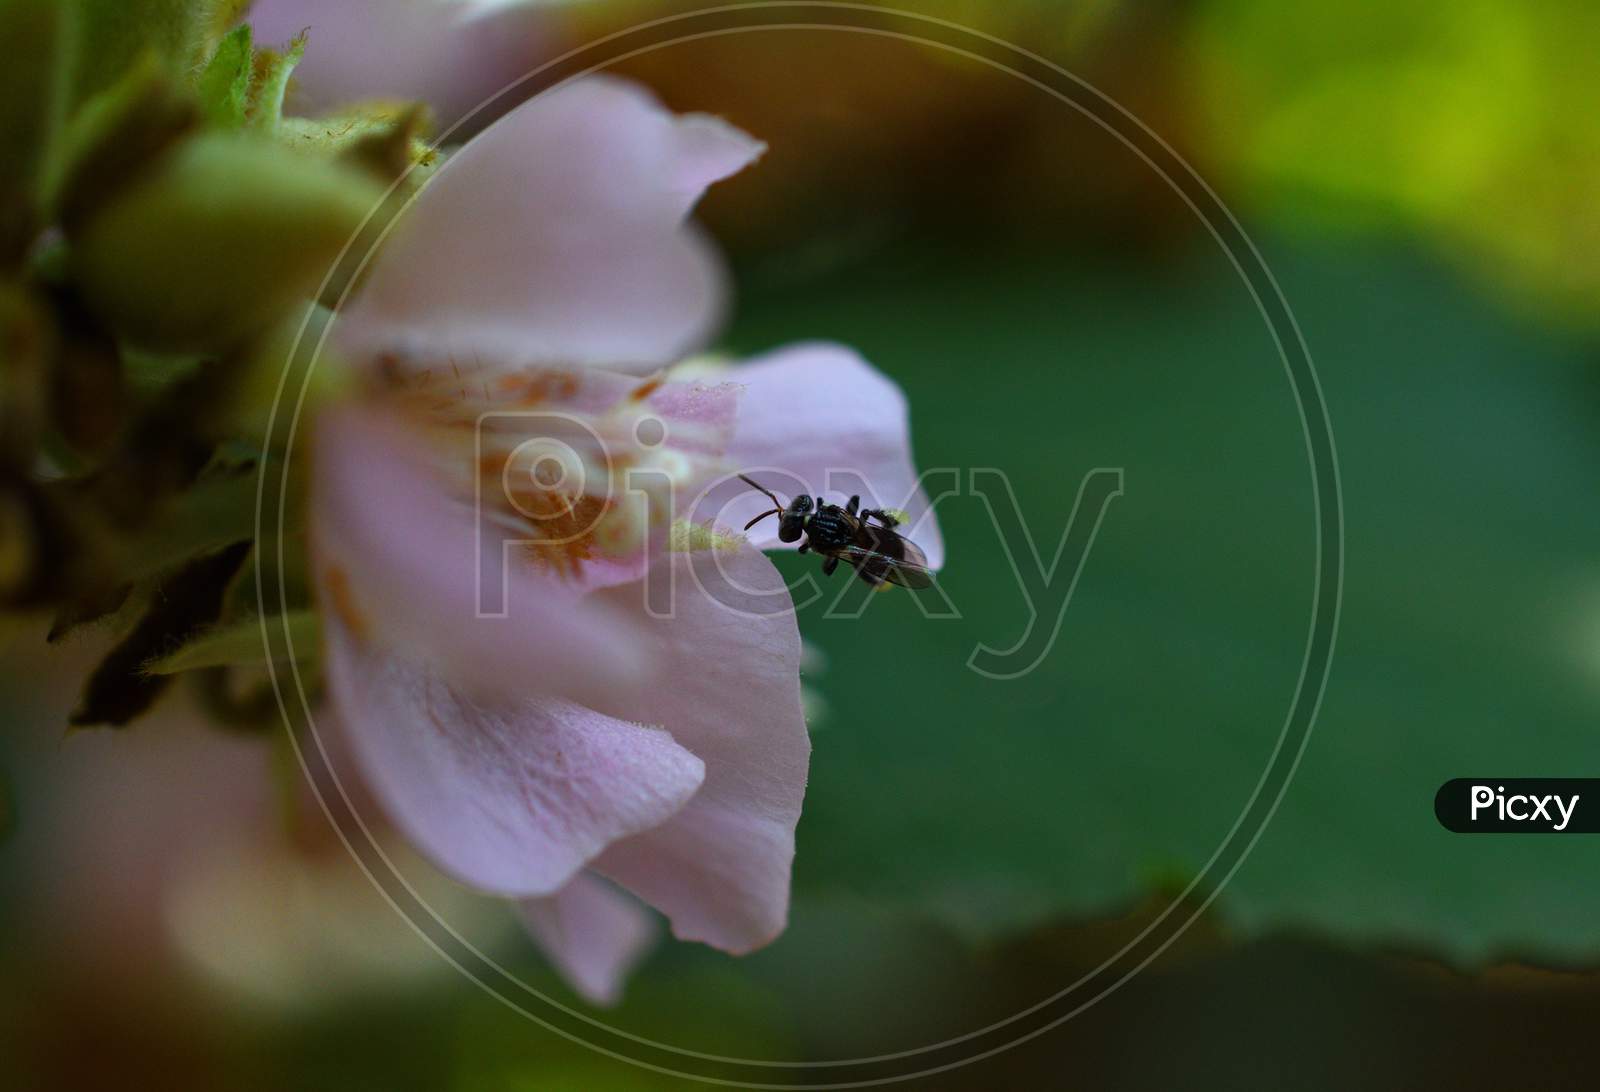 Small Black Insect Collecting Nectar From Flower